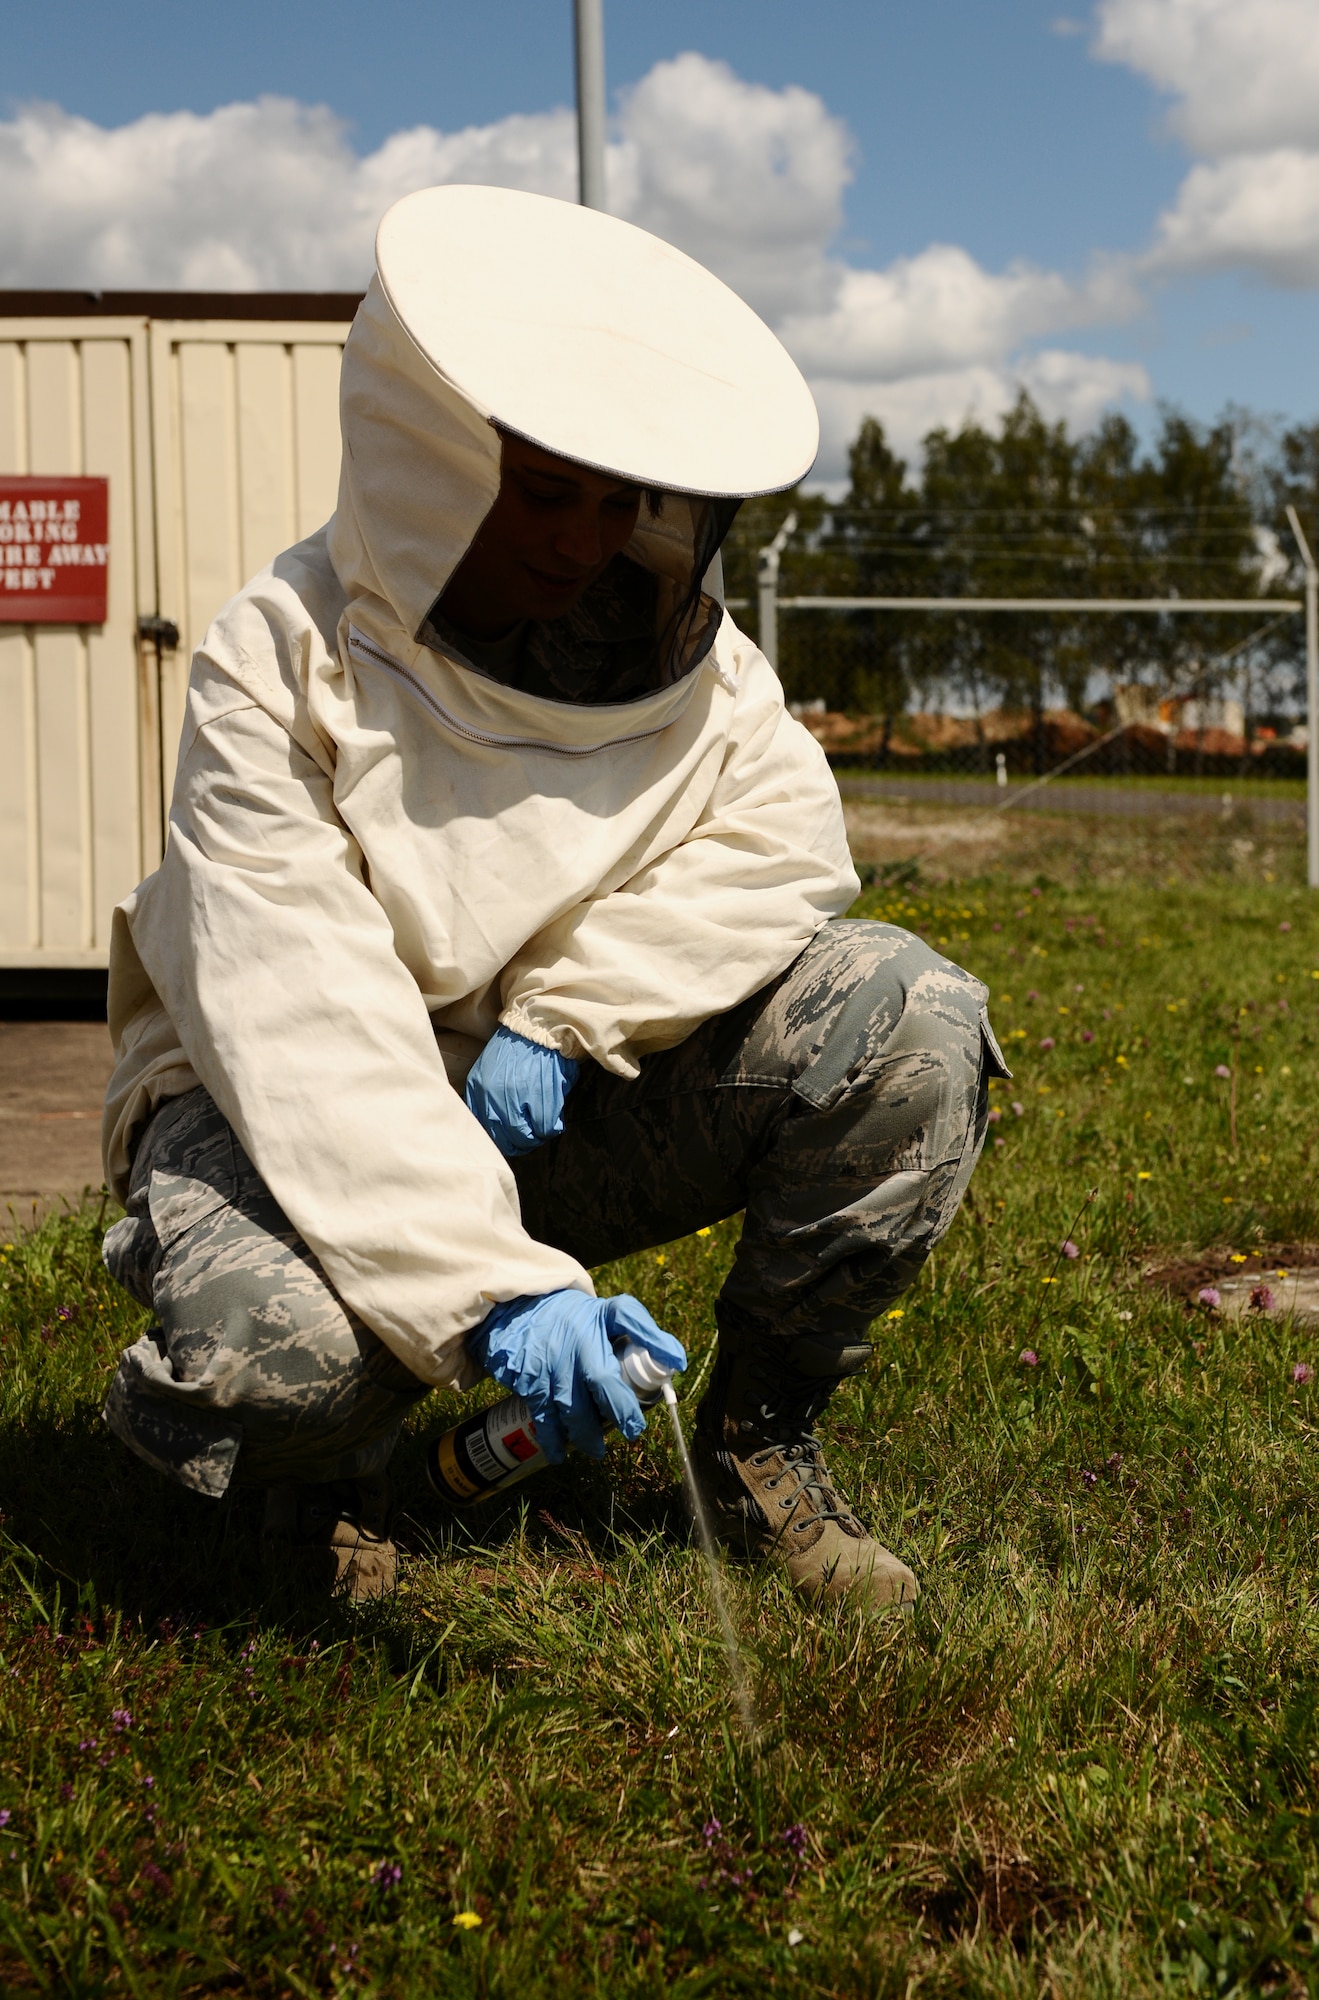 SPANGDAHLEM AIR BASE, Germany -- Airman 1st Class Elizabeth McCasland, 52nd Civil Engineer Squadron pest controller, sprays pesticide on a wasp nest in the ground here Aug. 15. The 52nd Civil Engineer Squadron Pest Management Flight specializes in ridding the base of insects, rodents and animals that may pose harm to base members and daily mission operations. (U.S. Air Force photo/Staff Sgt. Nathanael Callon)